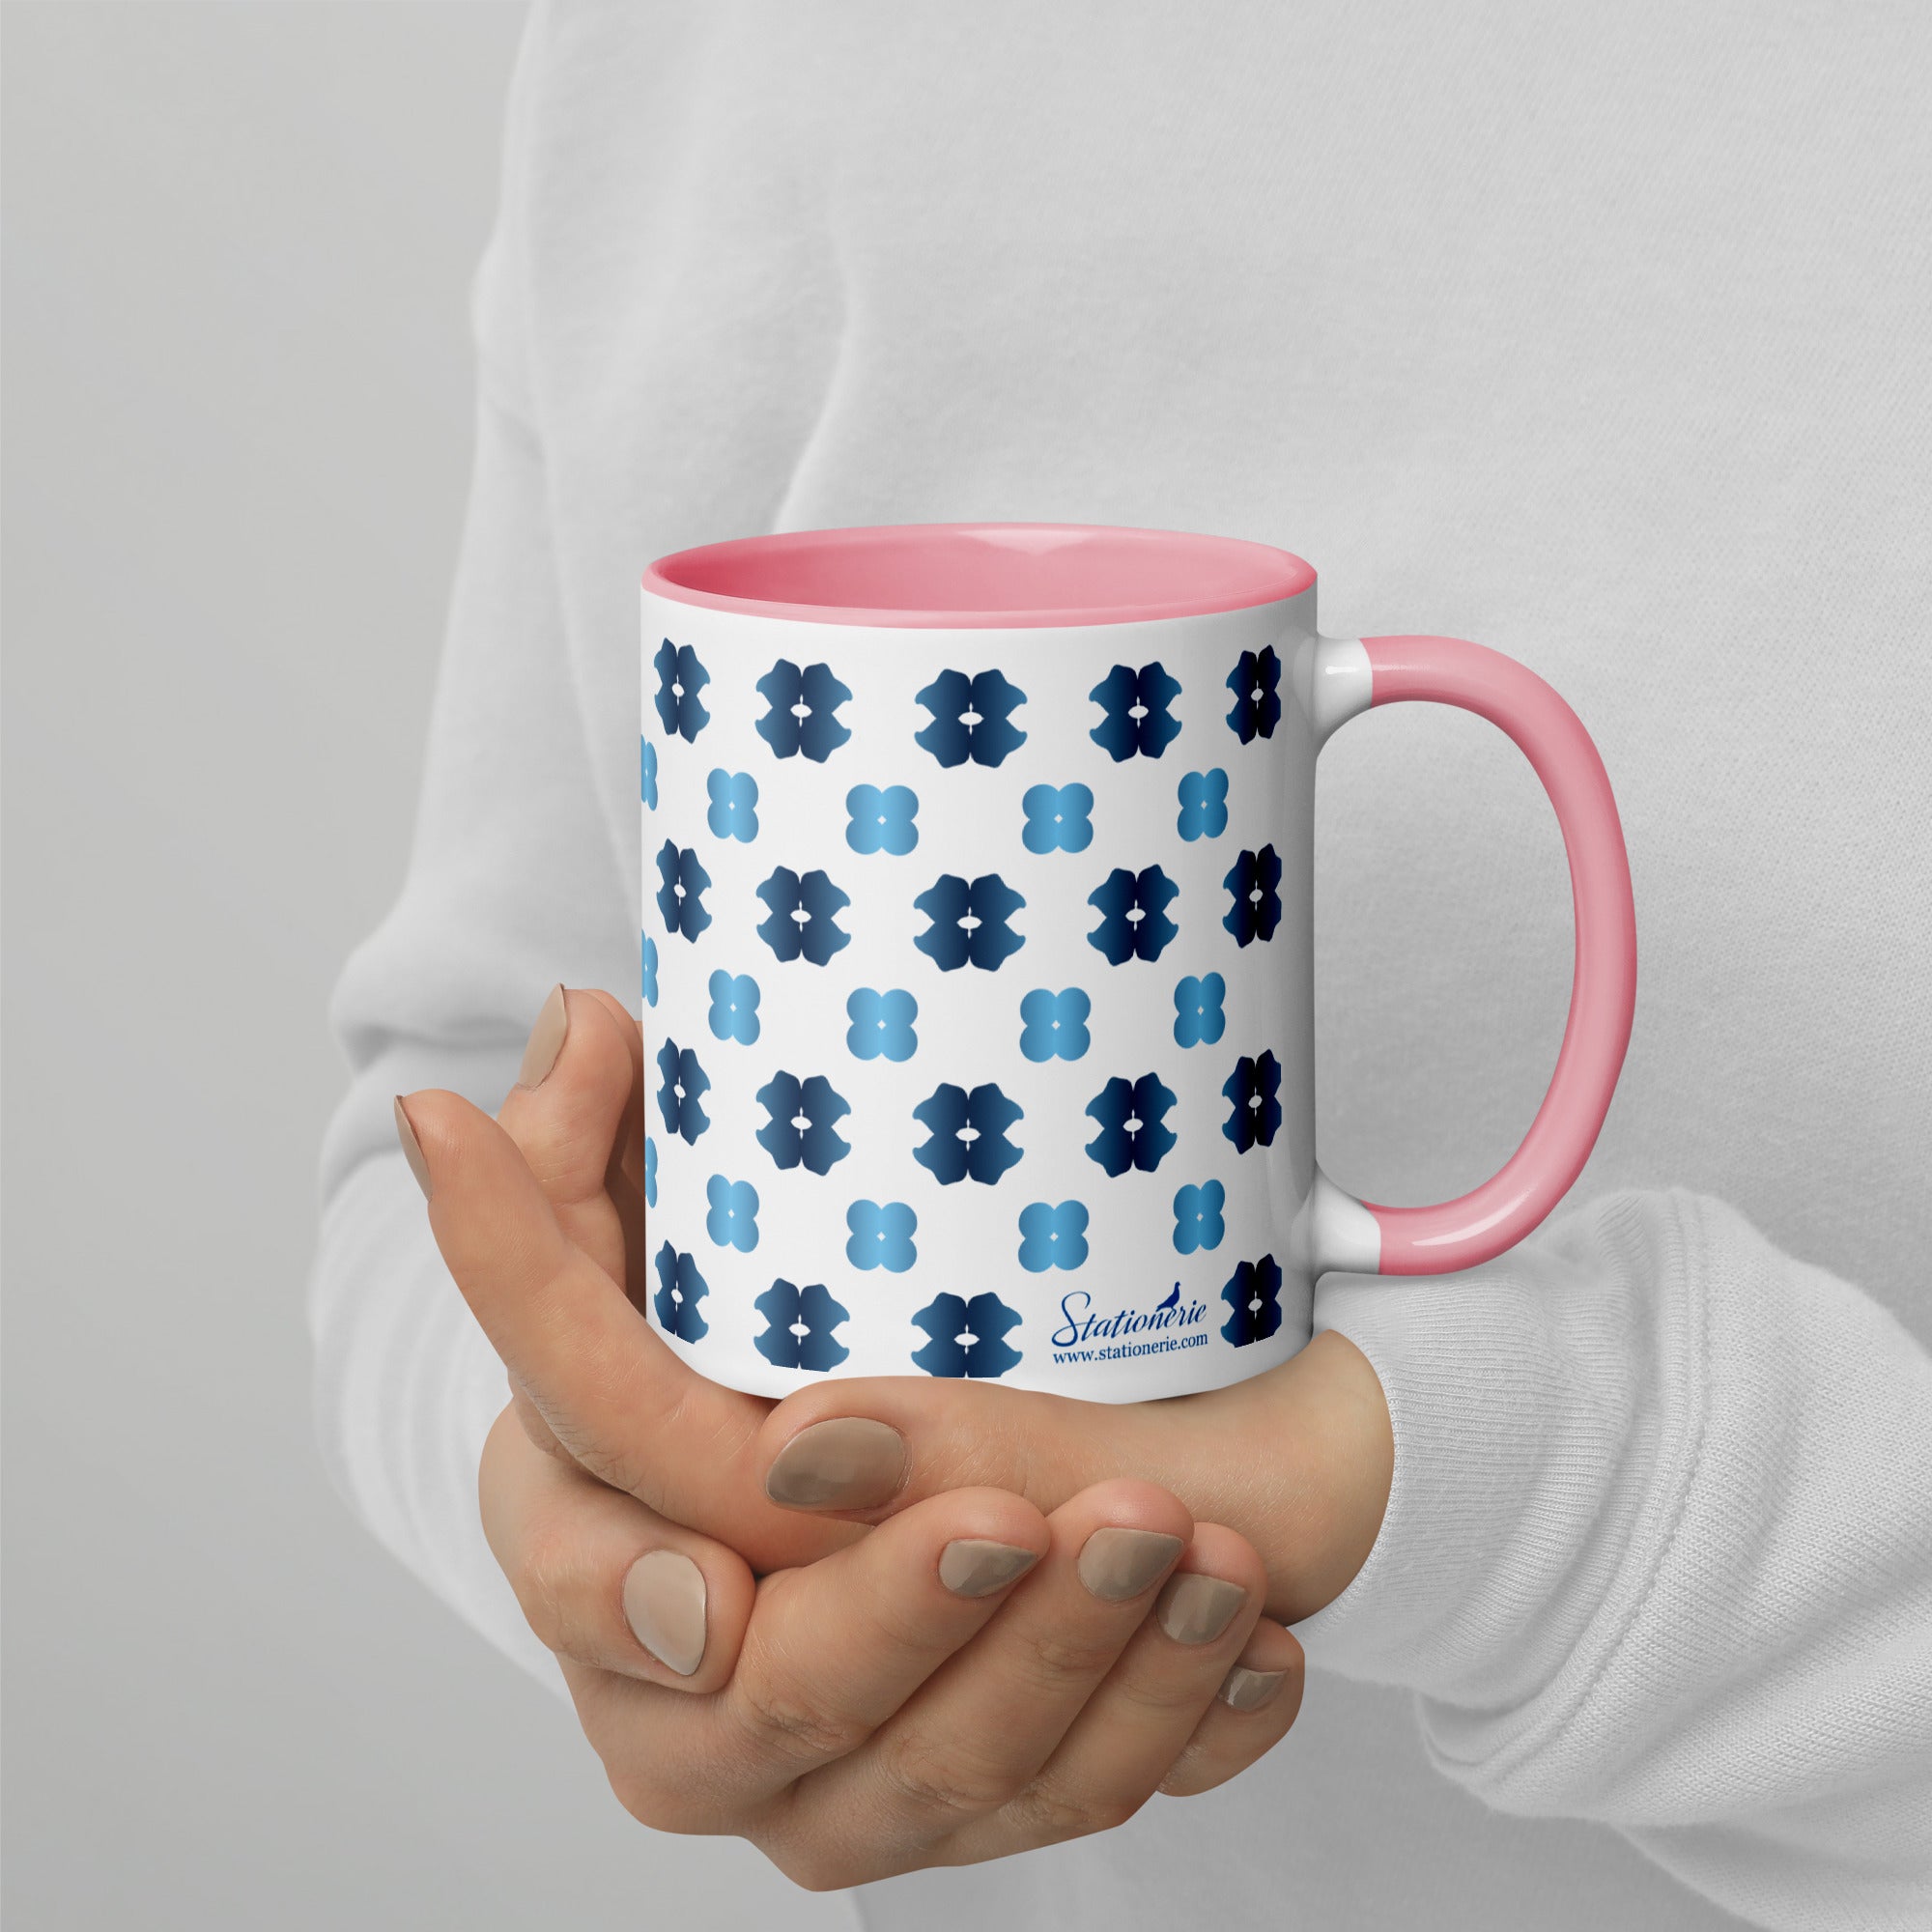 Pack of 4 Ceramic Mugs - Rorschach’s Flowers in Pink